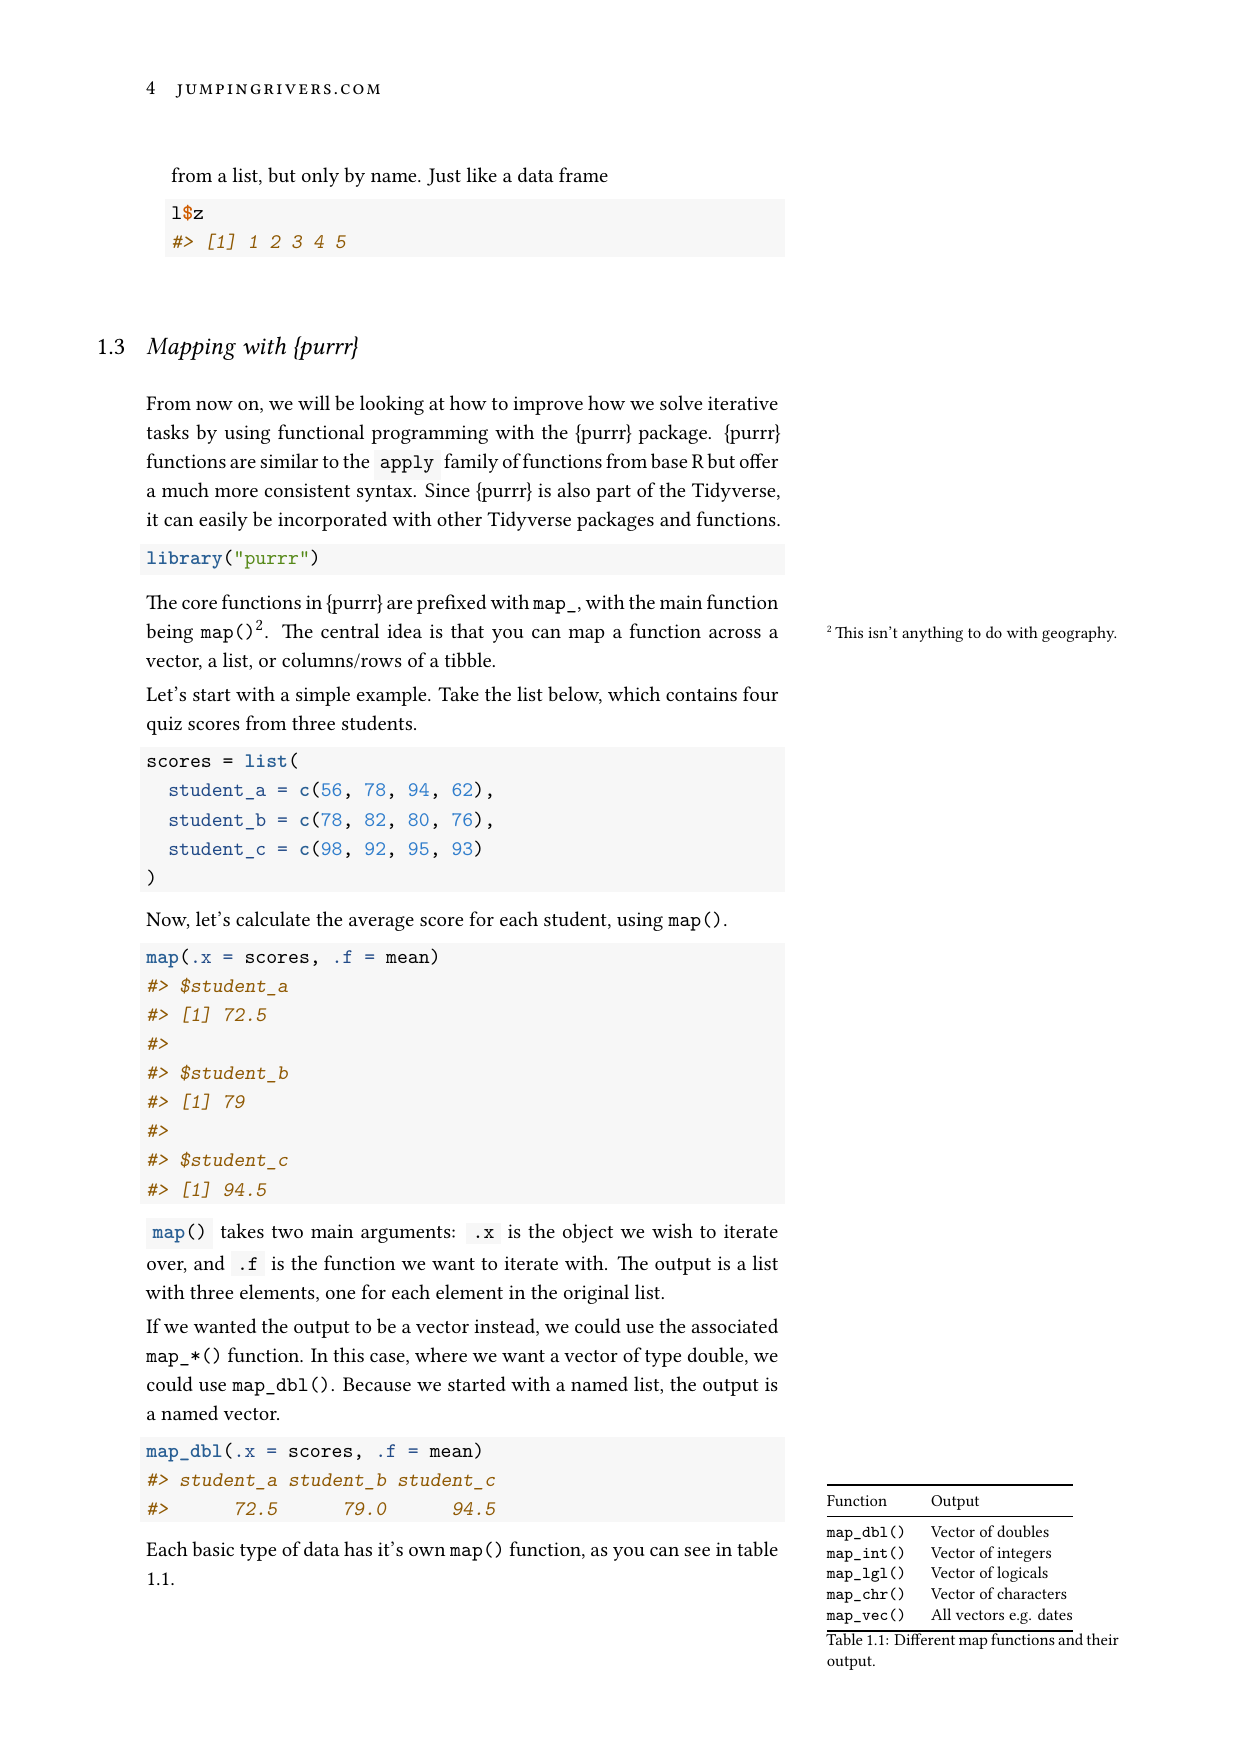 Page 4 of example course material for Functional Programming with purrr